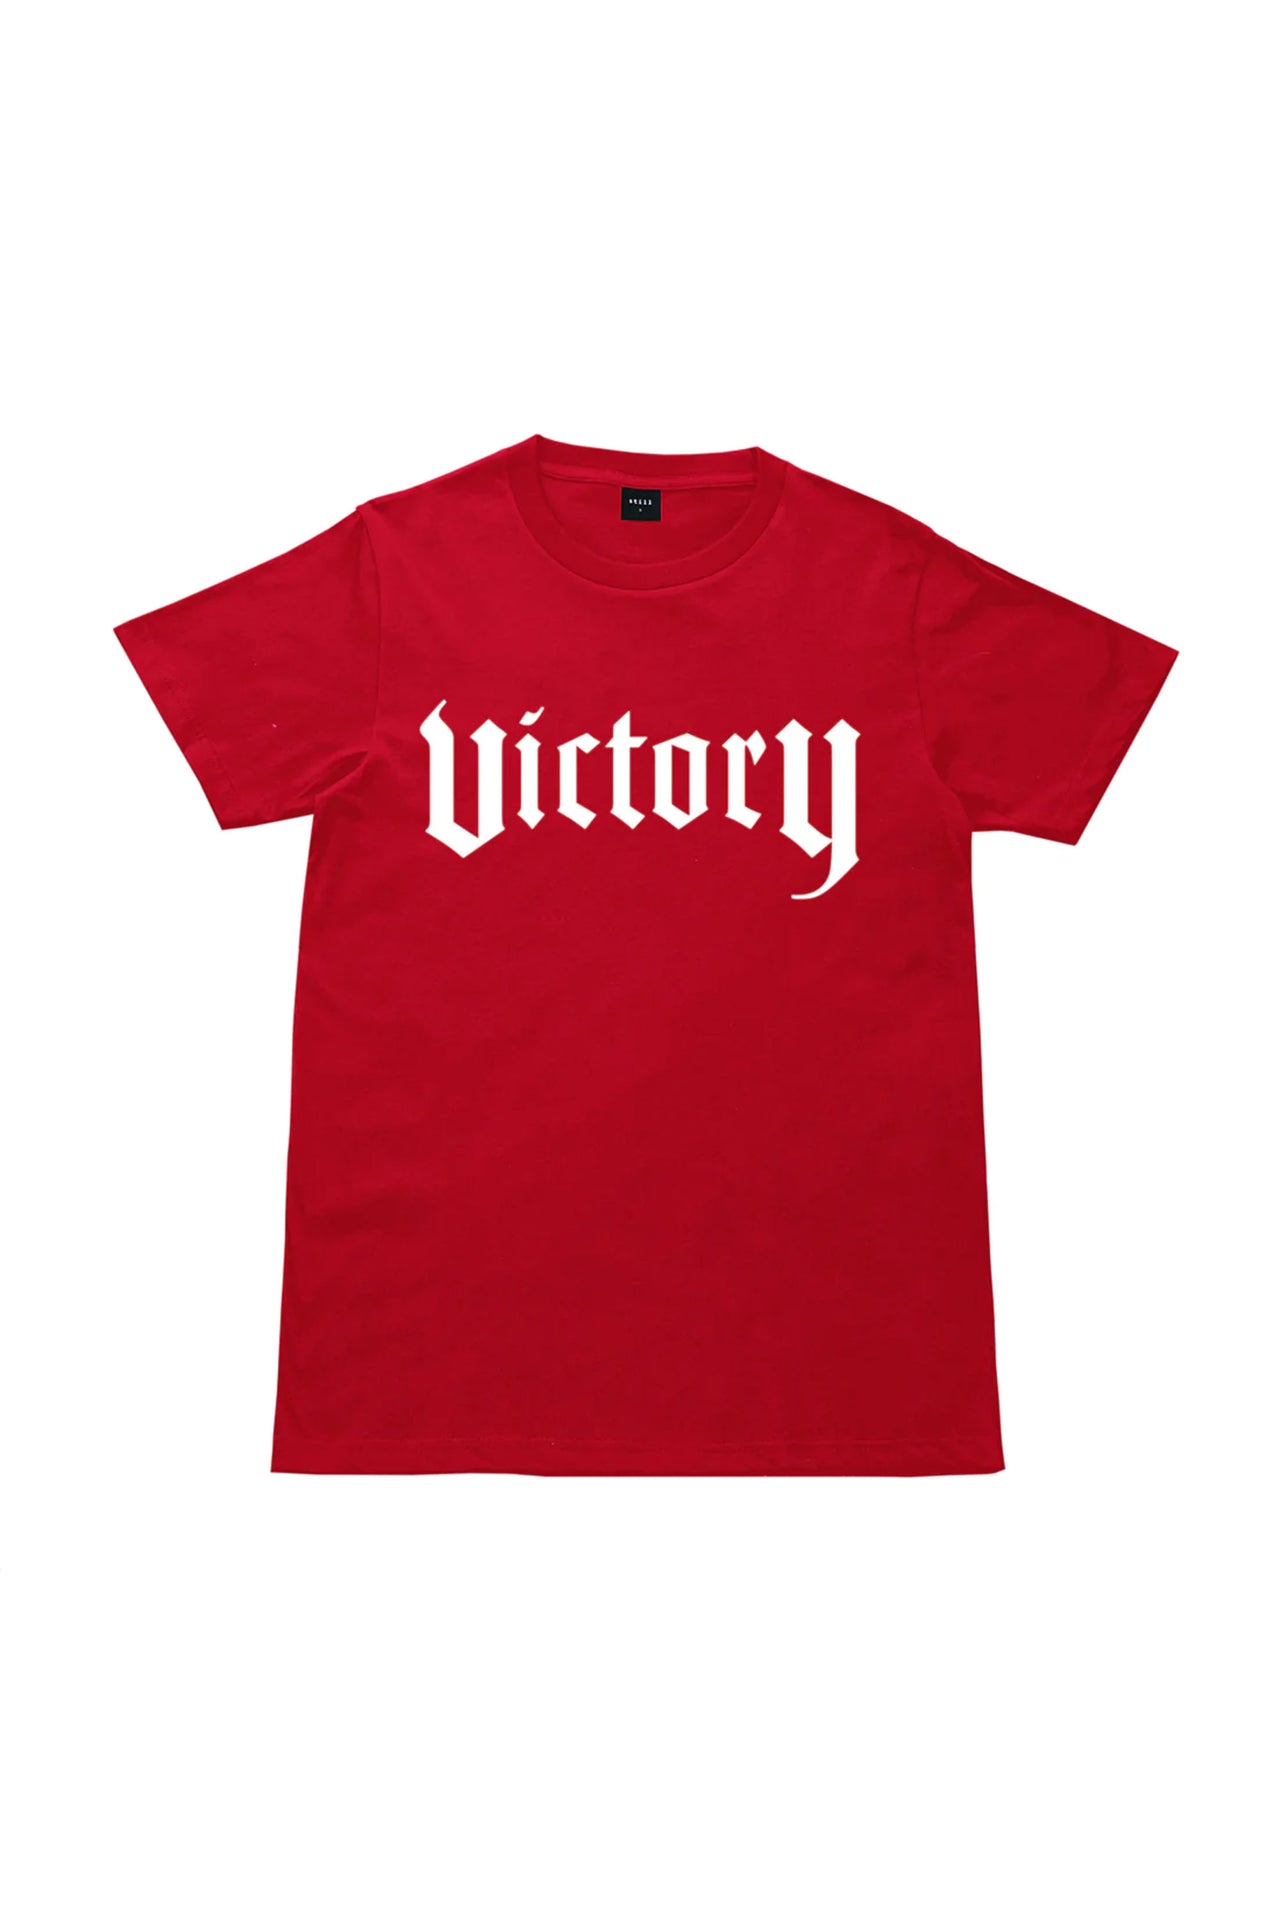 VICTORY Tee (Red)